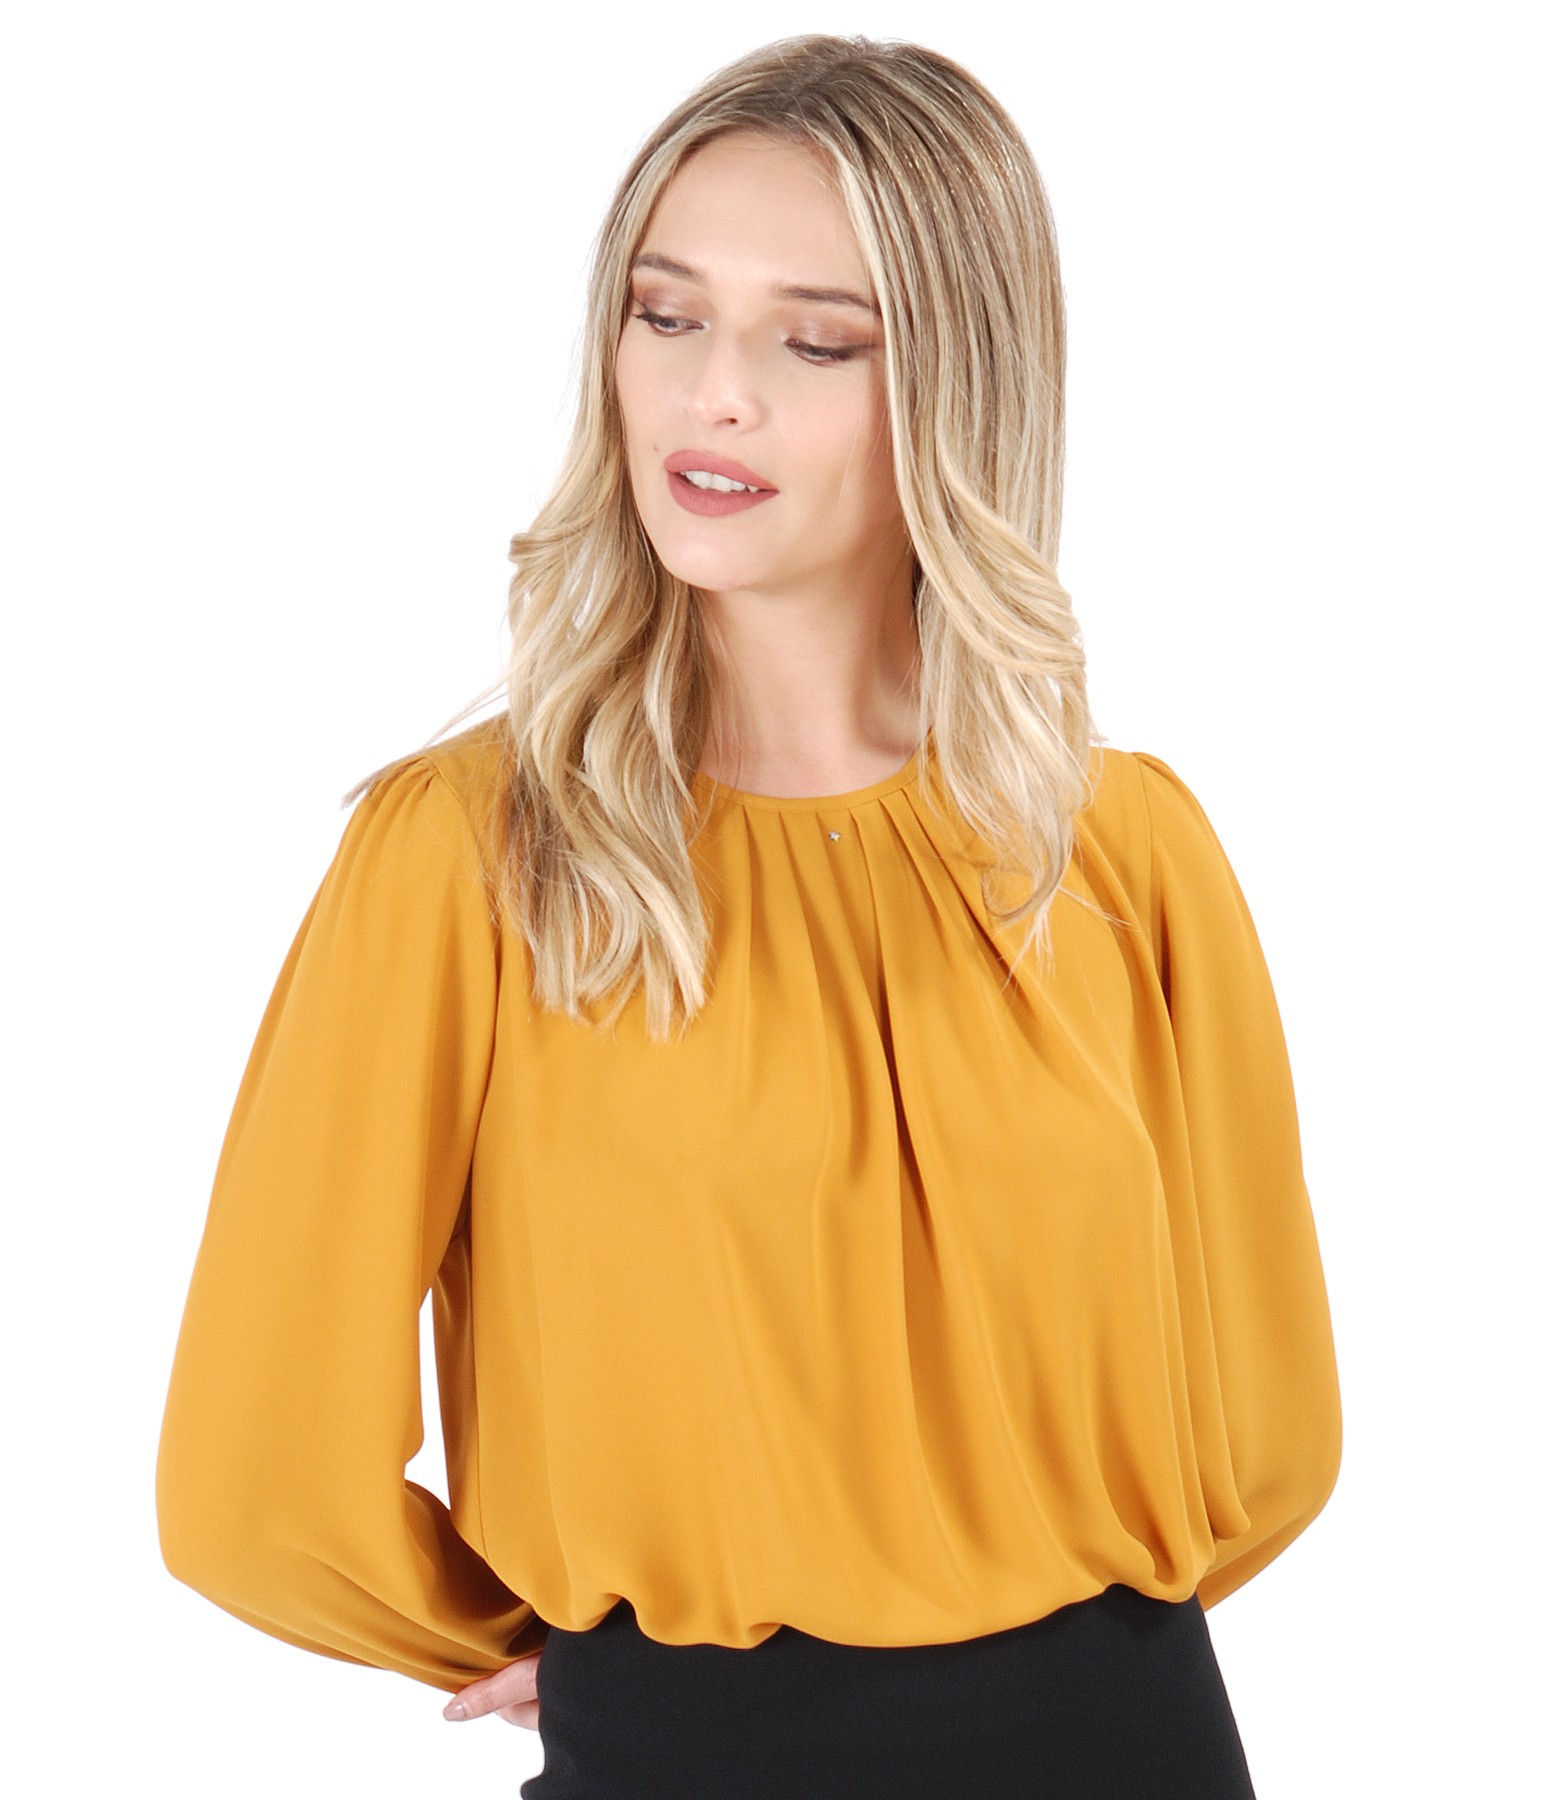 Blouse with folds on decolletage embellished with crystals mustard